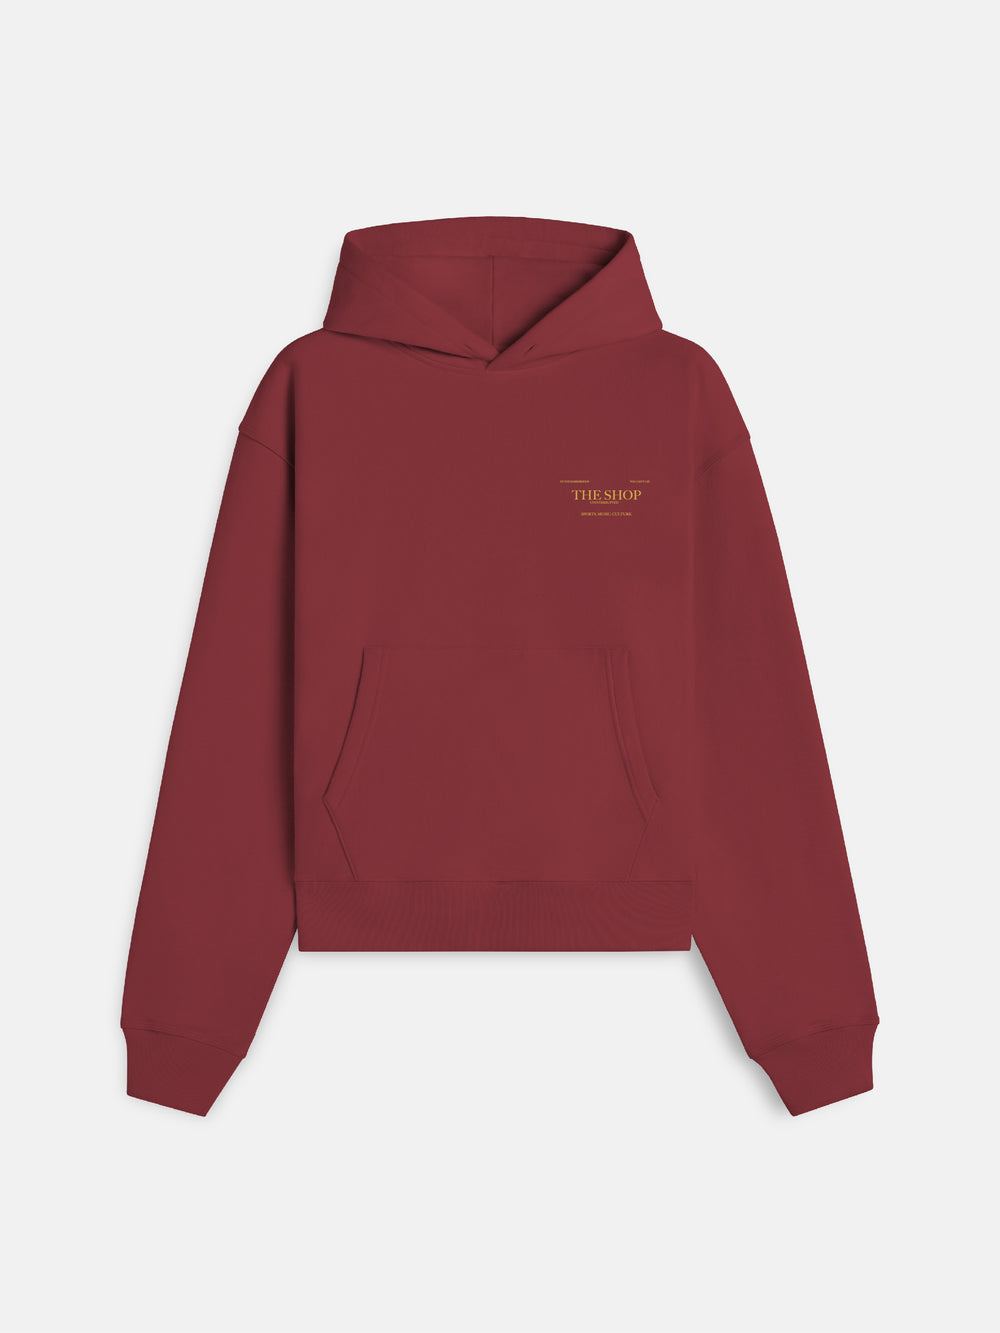 The Shop Chair Hoodie Burgundy - Front